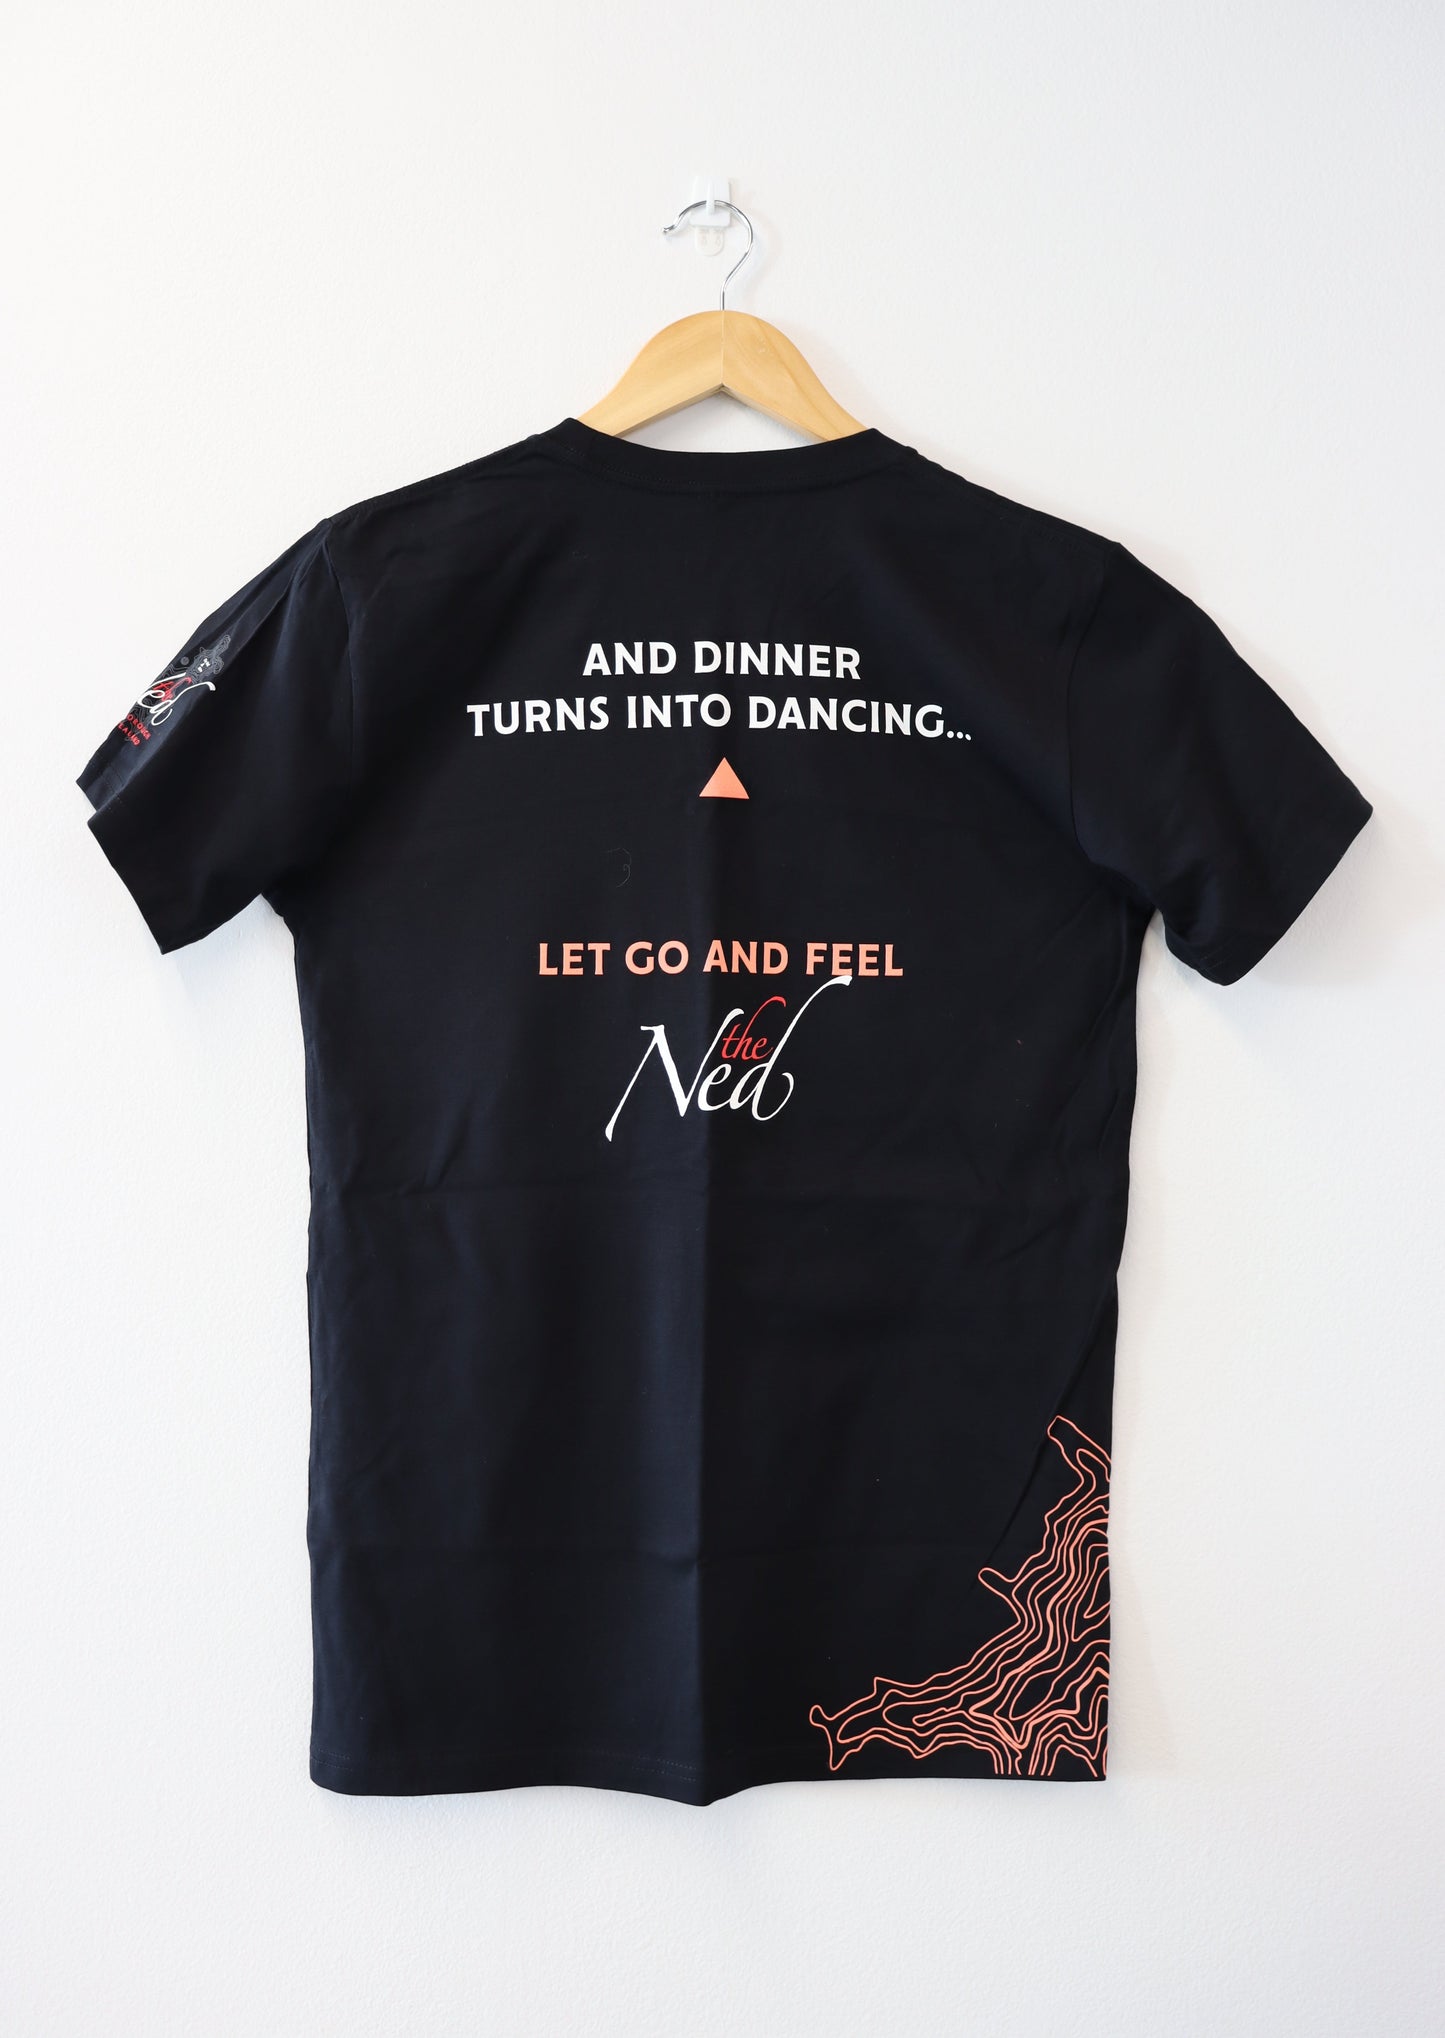 LET GO AND FEEL THE NED T-SHIRT